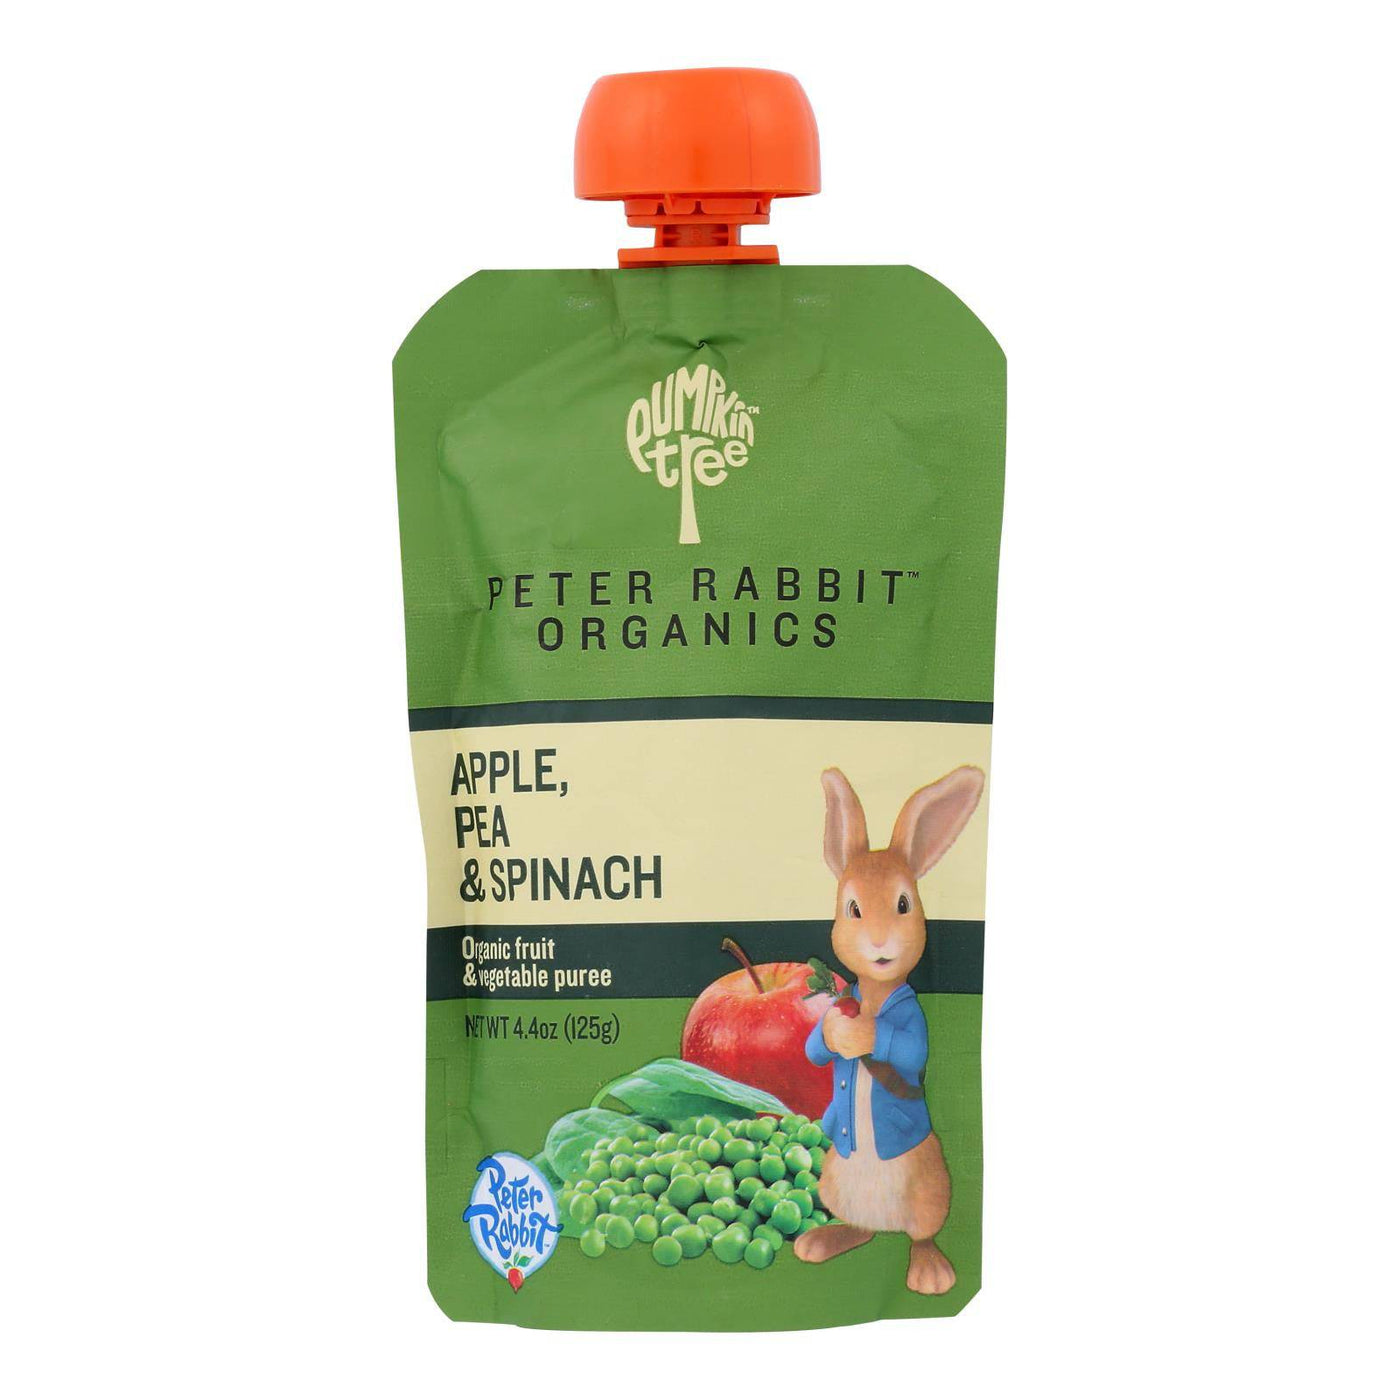 Peter Rabbit Organics Veggie Snacks - Pea Spinach And Apple - Case Of 10 - 4.4 Oz. | OnlyNaturals.us